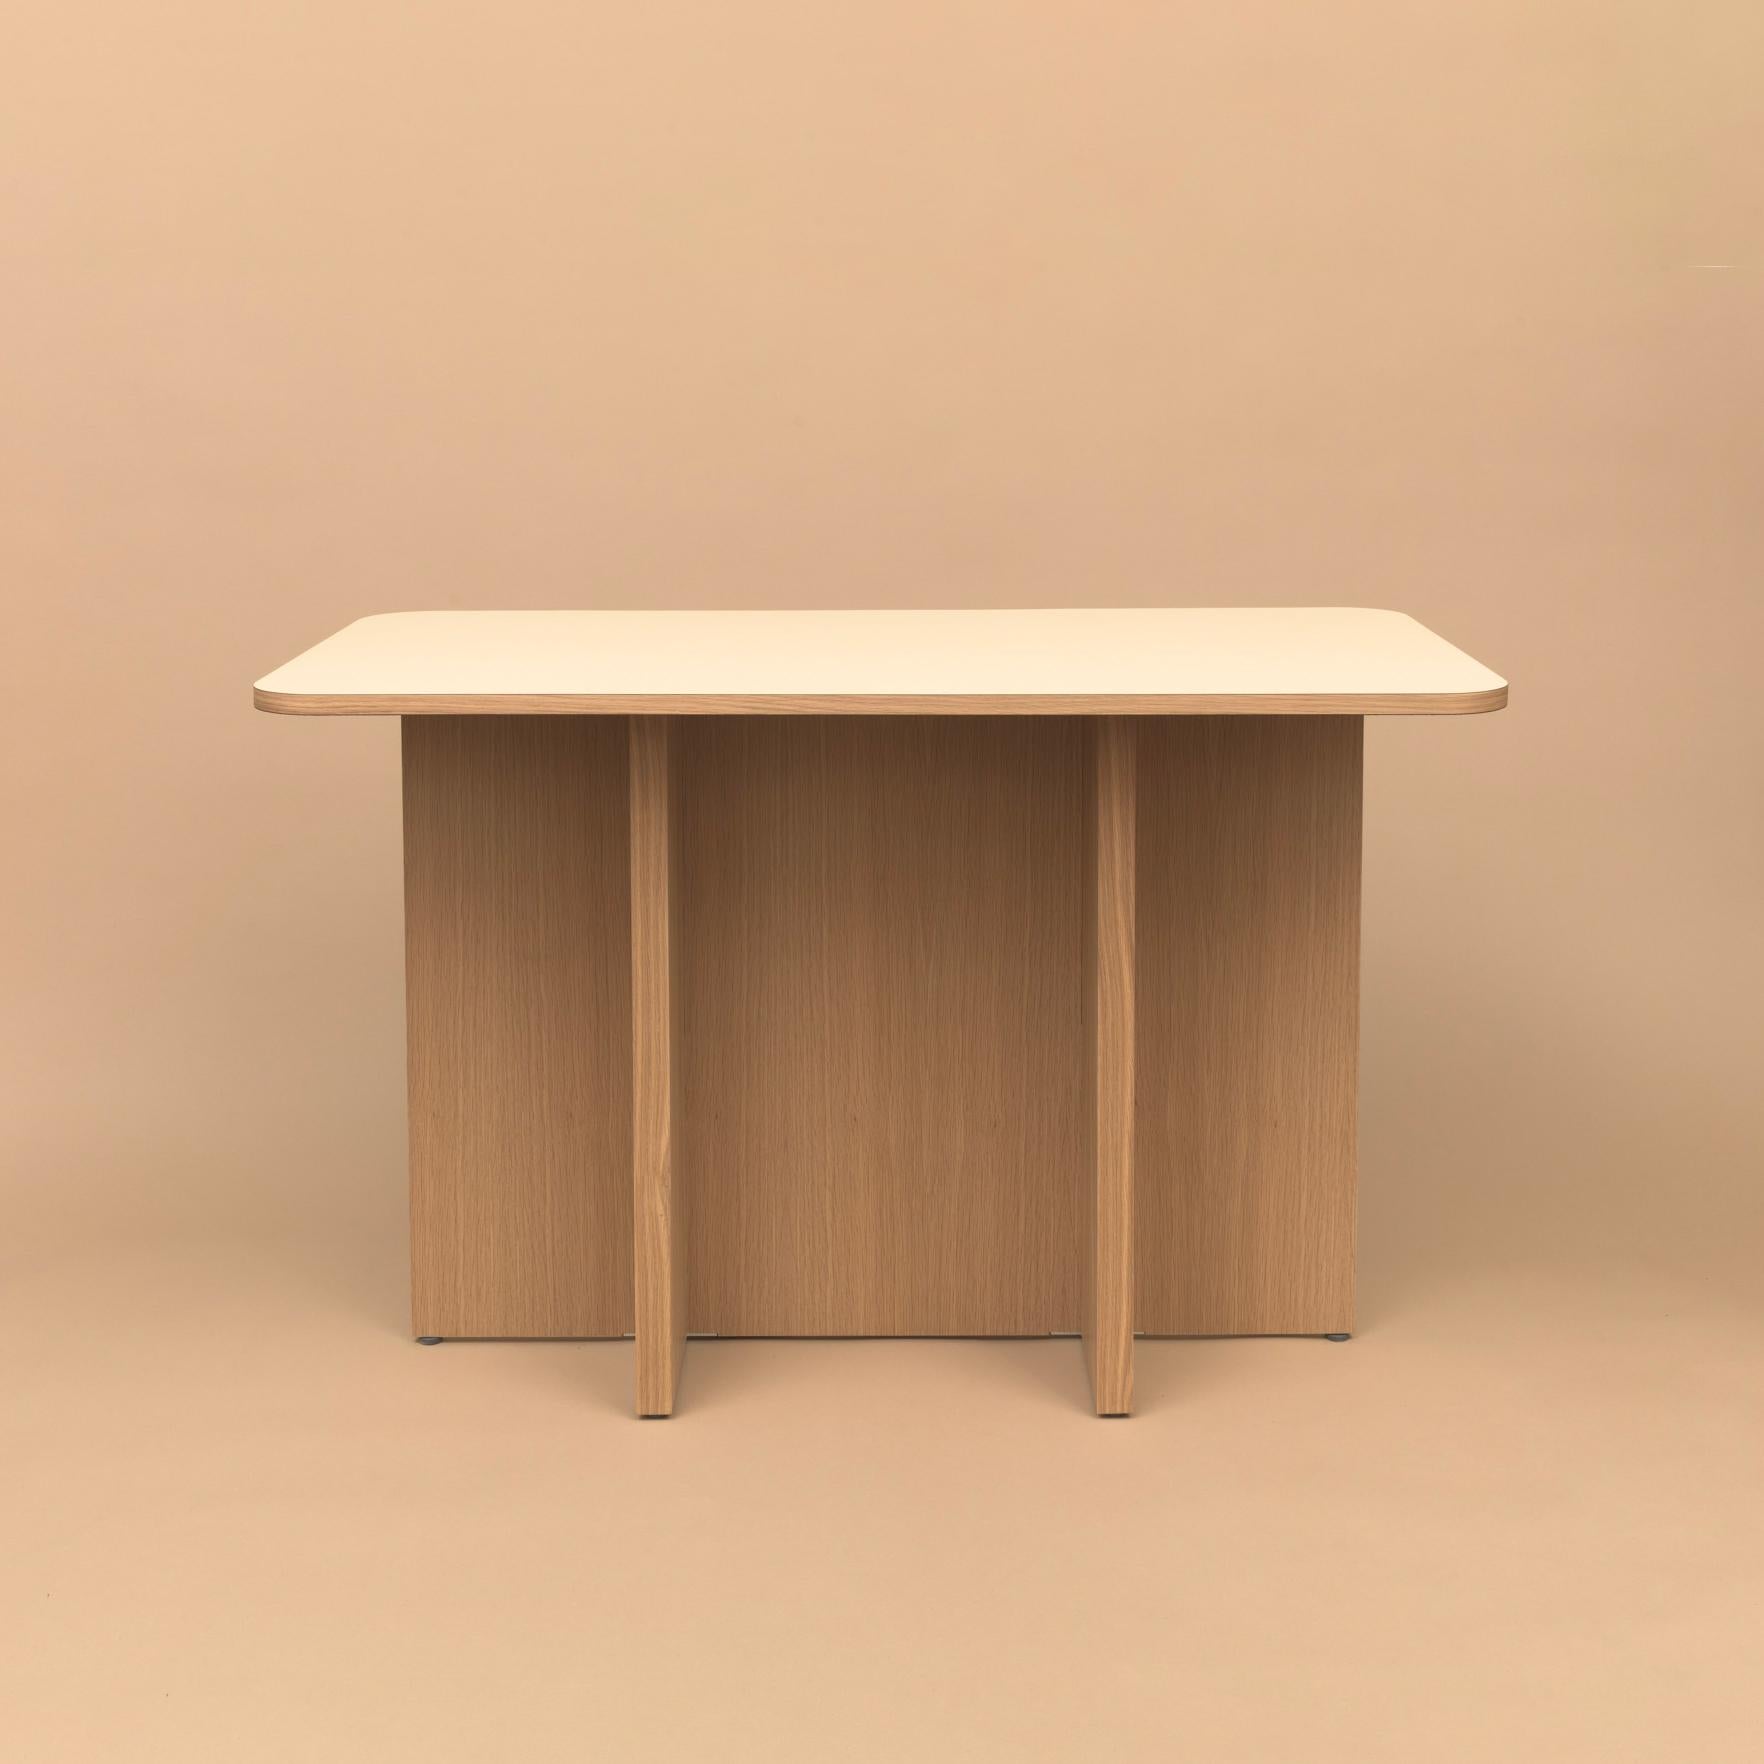 North American T-Top Dining Table in White Oak Veneered Plywood and Colorful Laminate